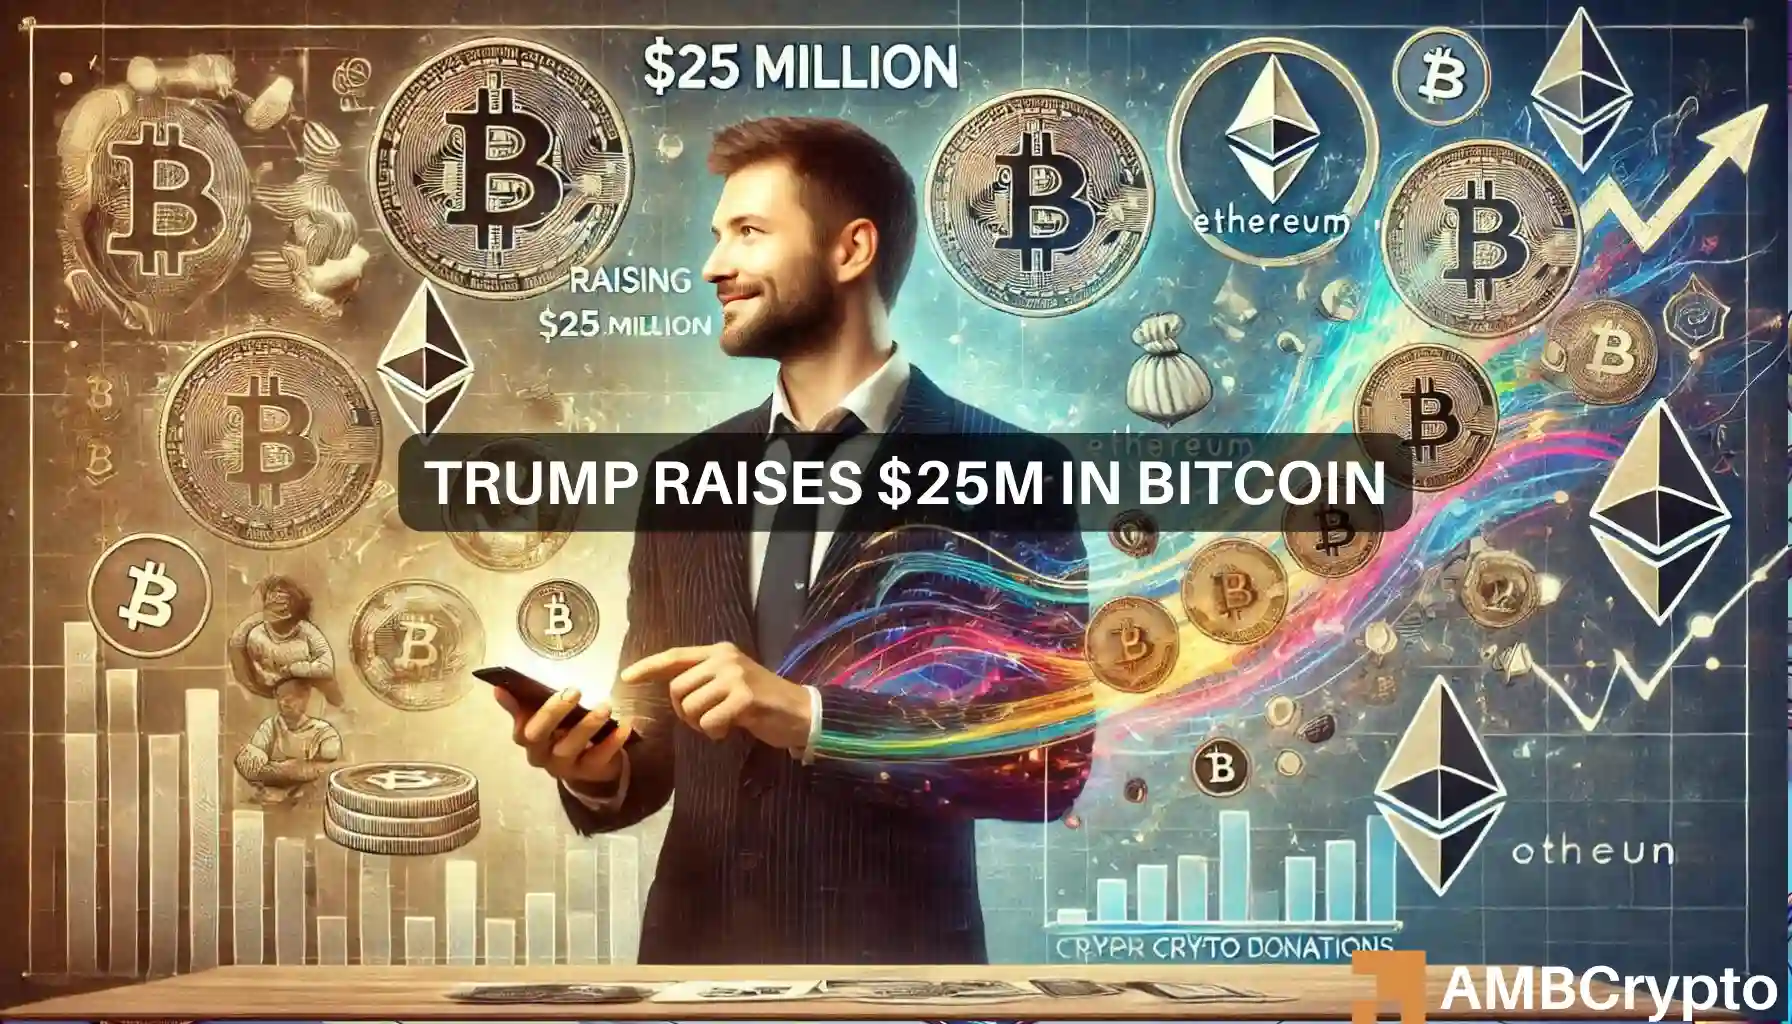 Trump campaign launches BTC sneakers, hits $25M crypto donations